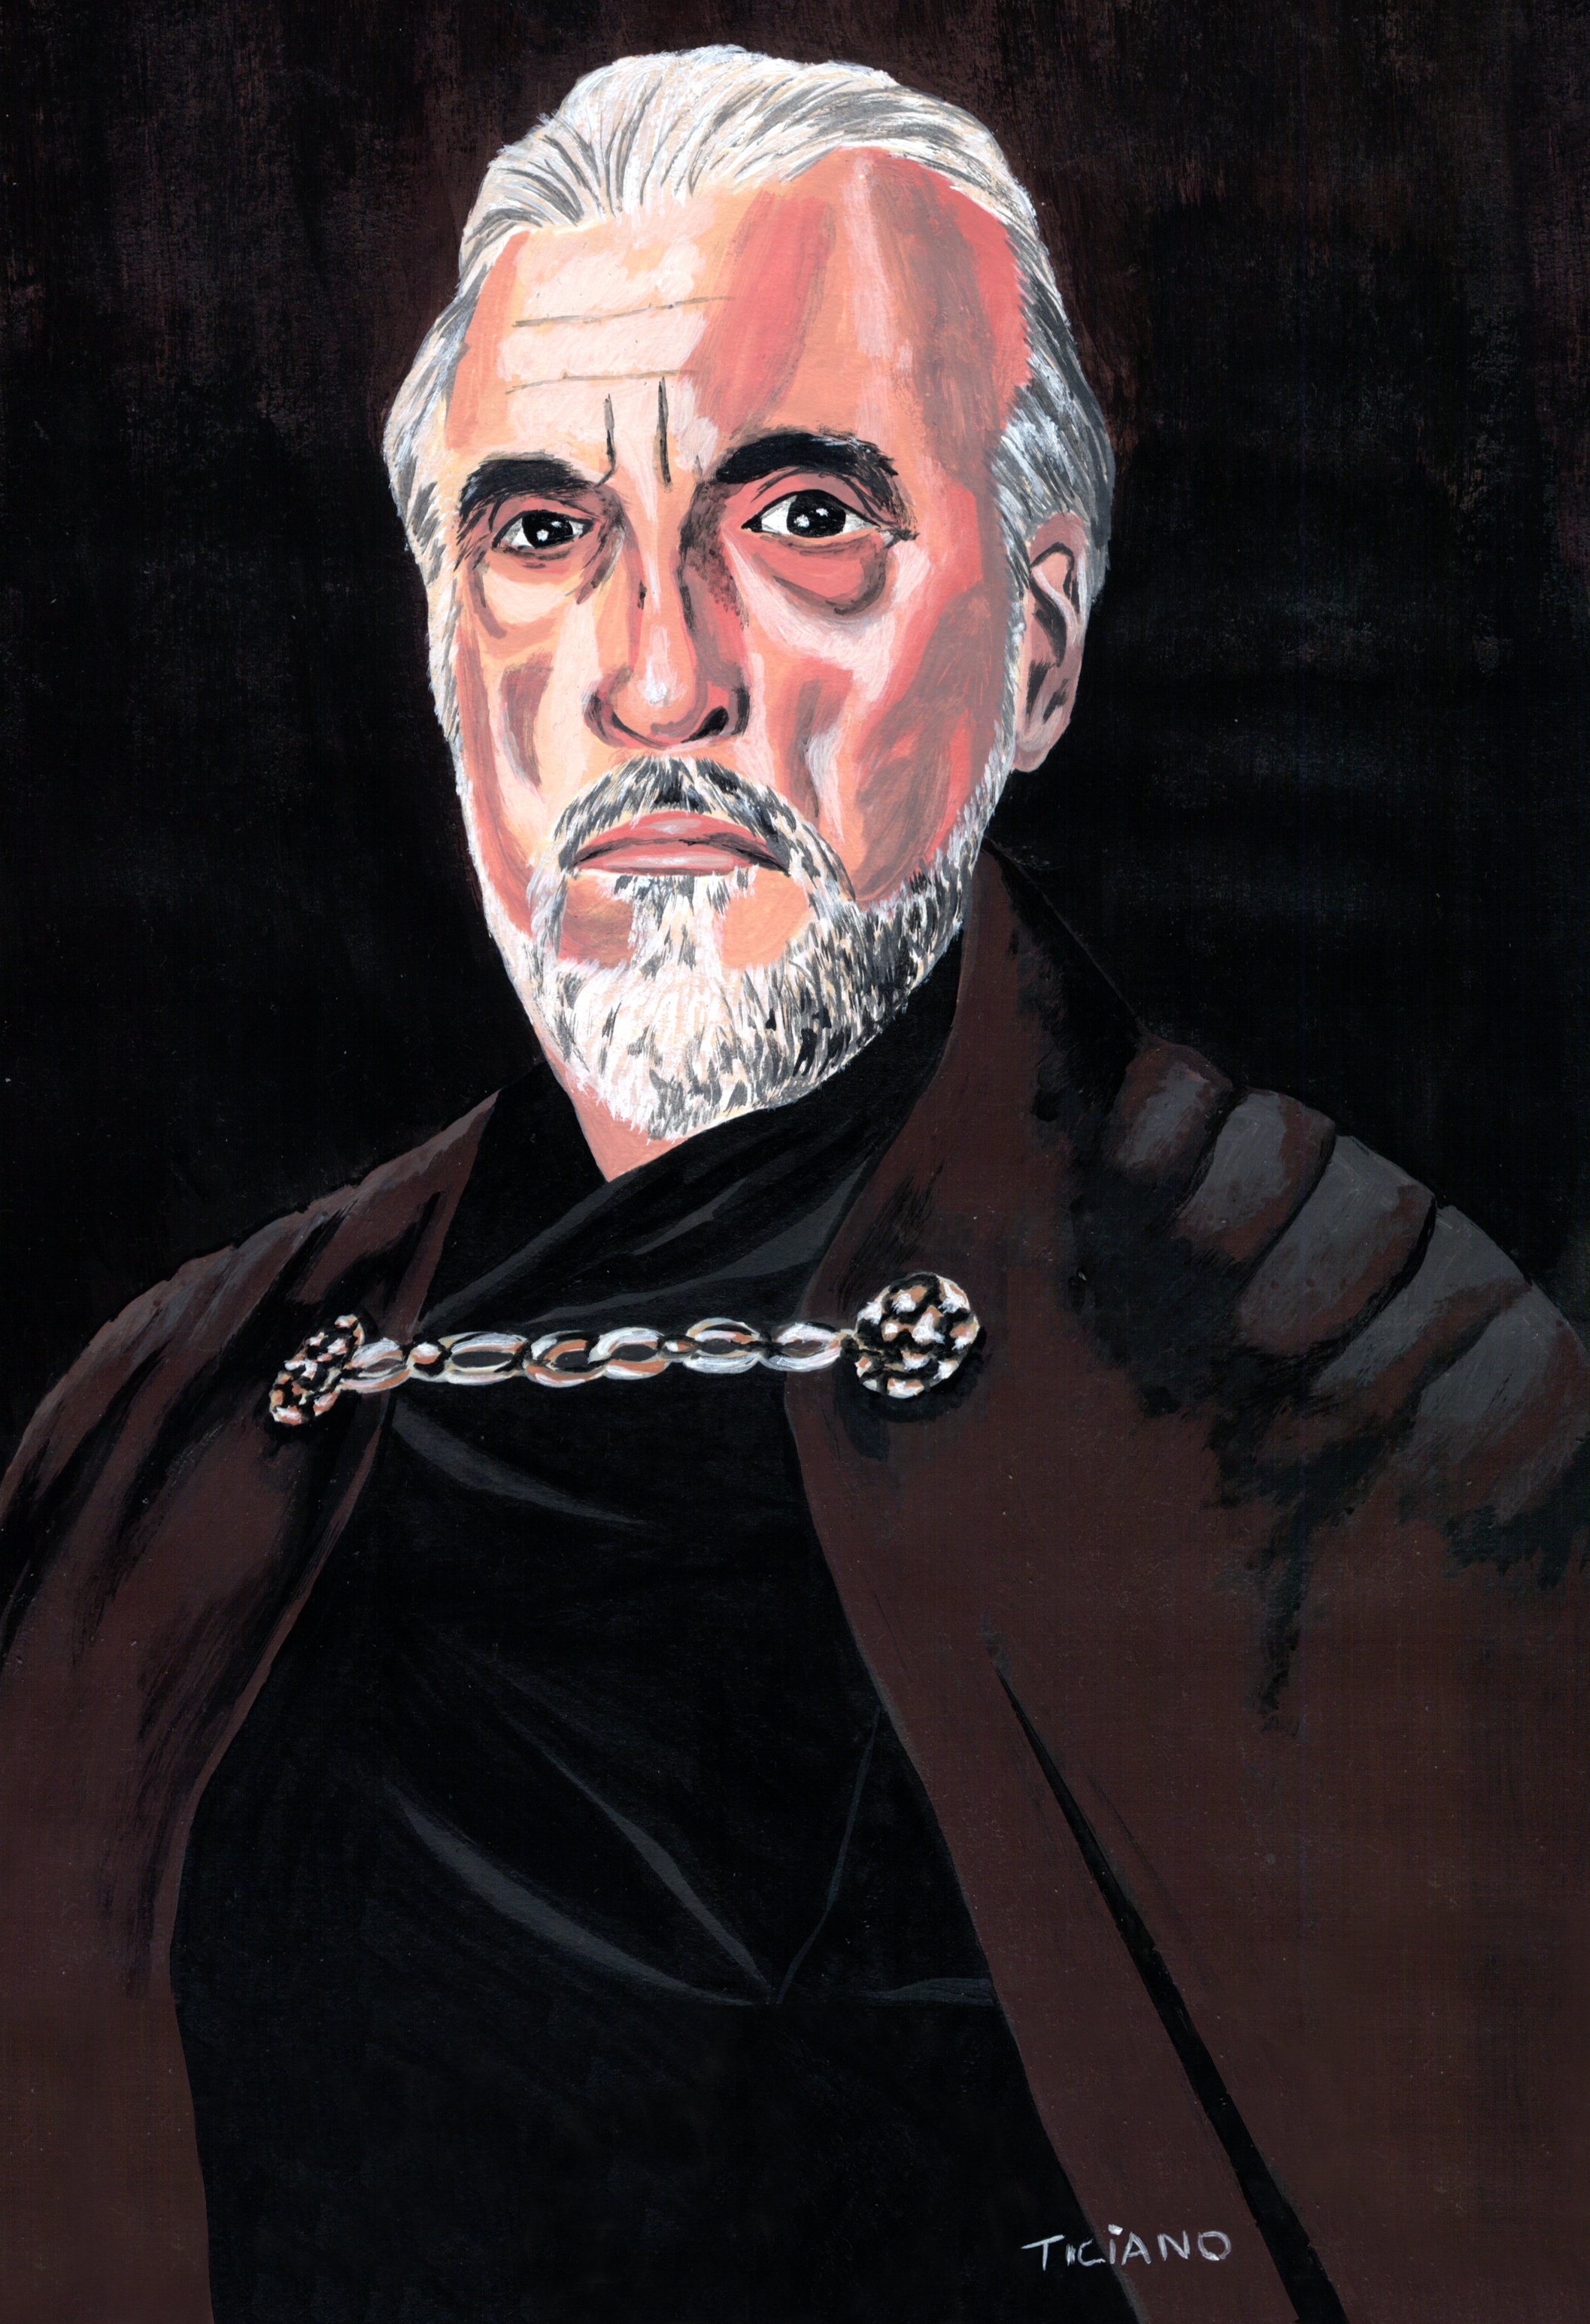 Count Dooku by Ticiano on